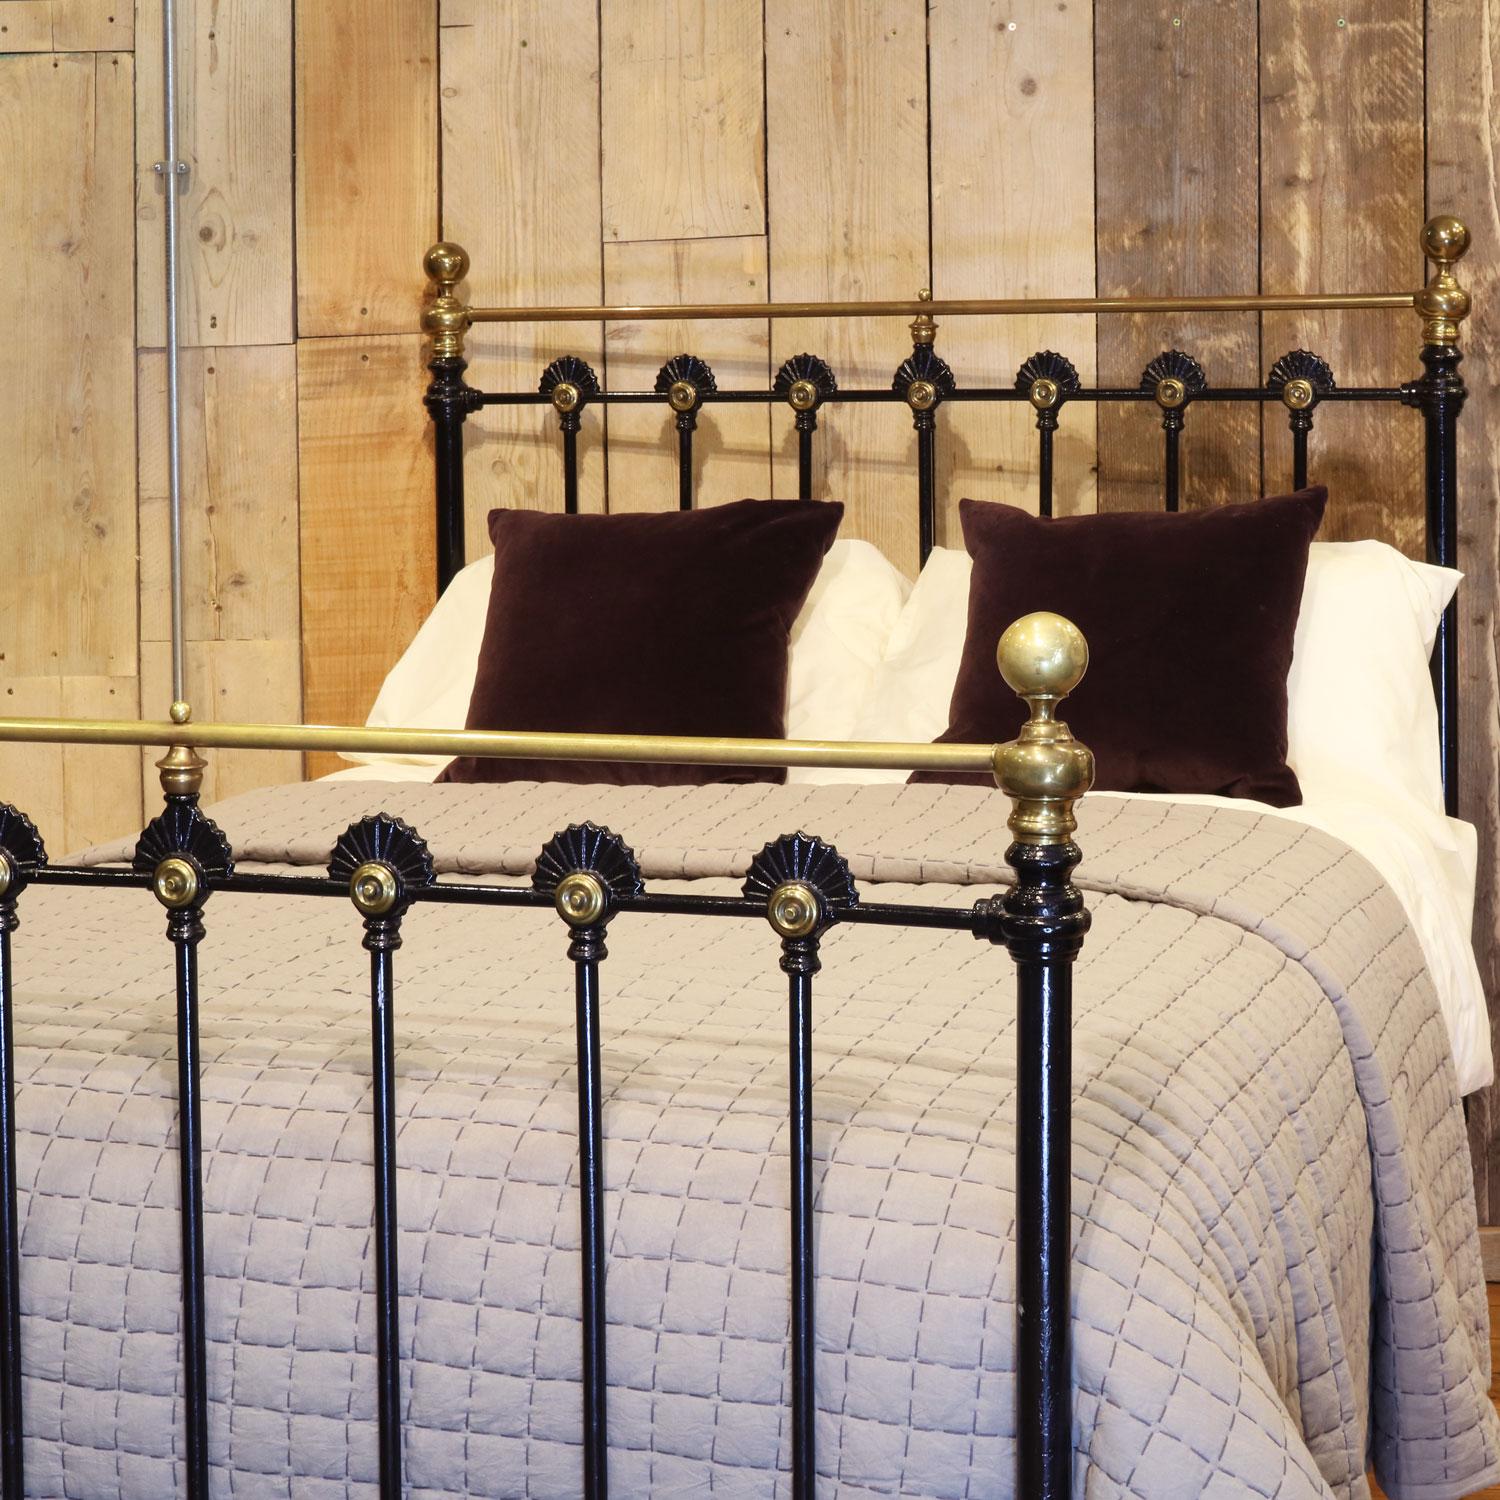 Late Victorian brass and cast iron bedstead, finished in black with straight brass top rail and stunning brass rosettes upon iron castings on the head and foot boards. 

This bed accepts a double size 4ft 6in wide (54 inch or 135cm) base and